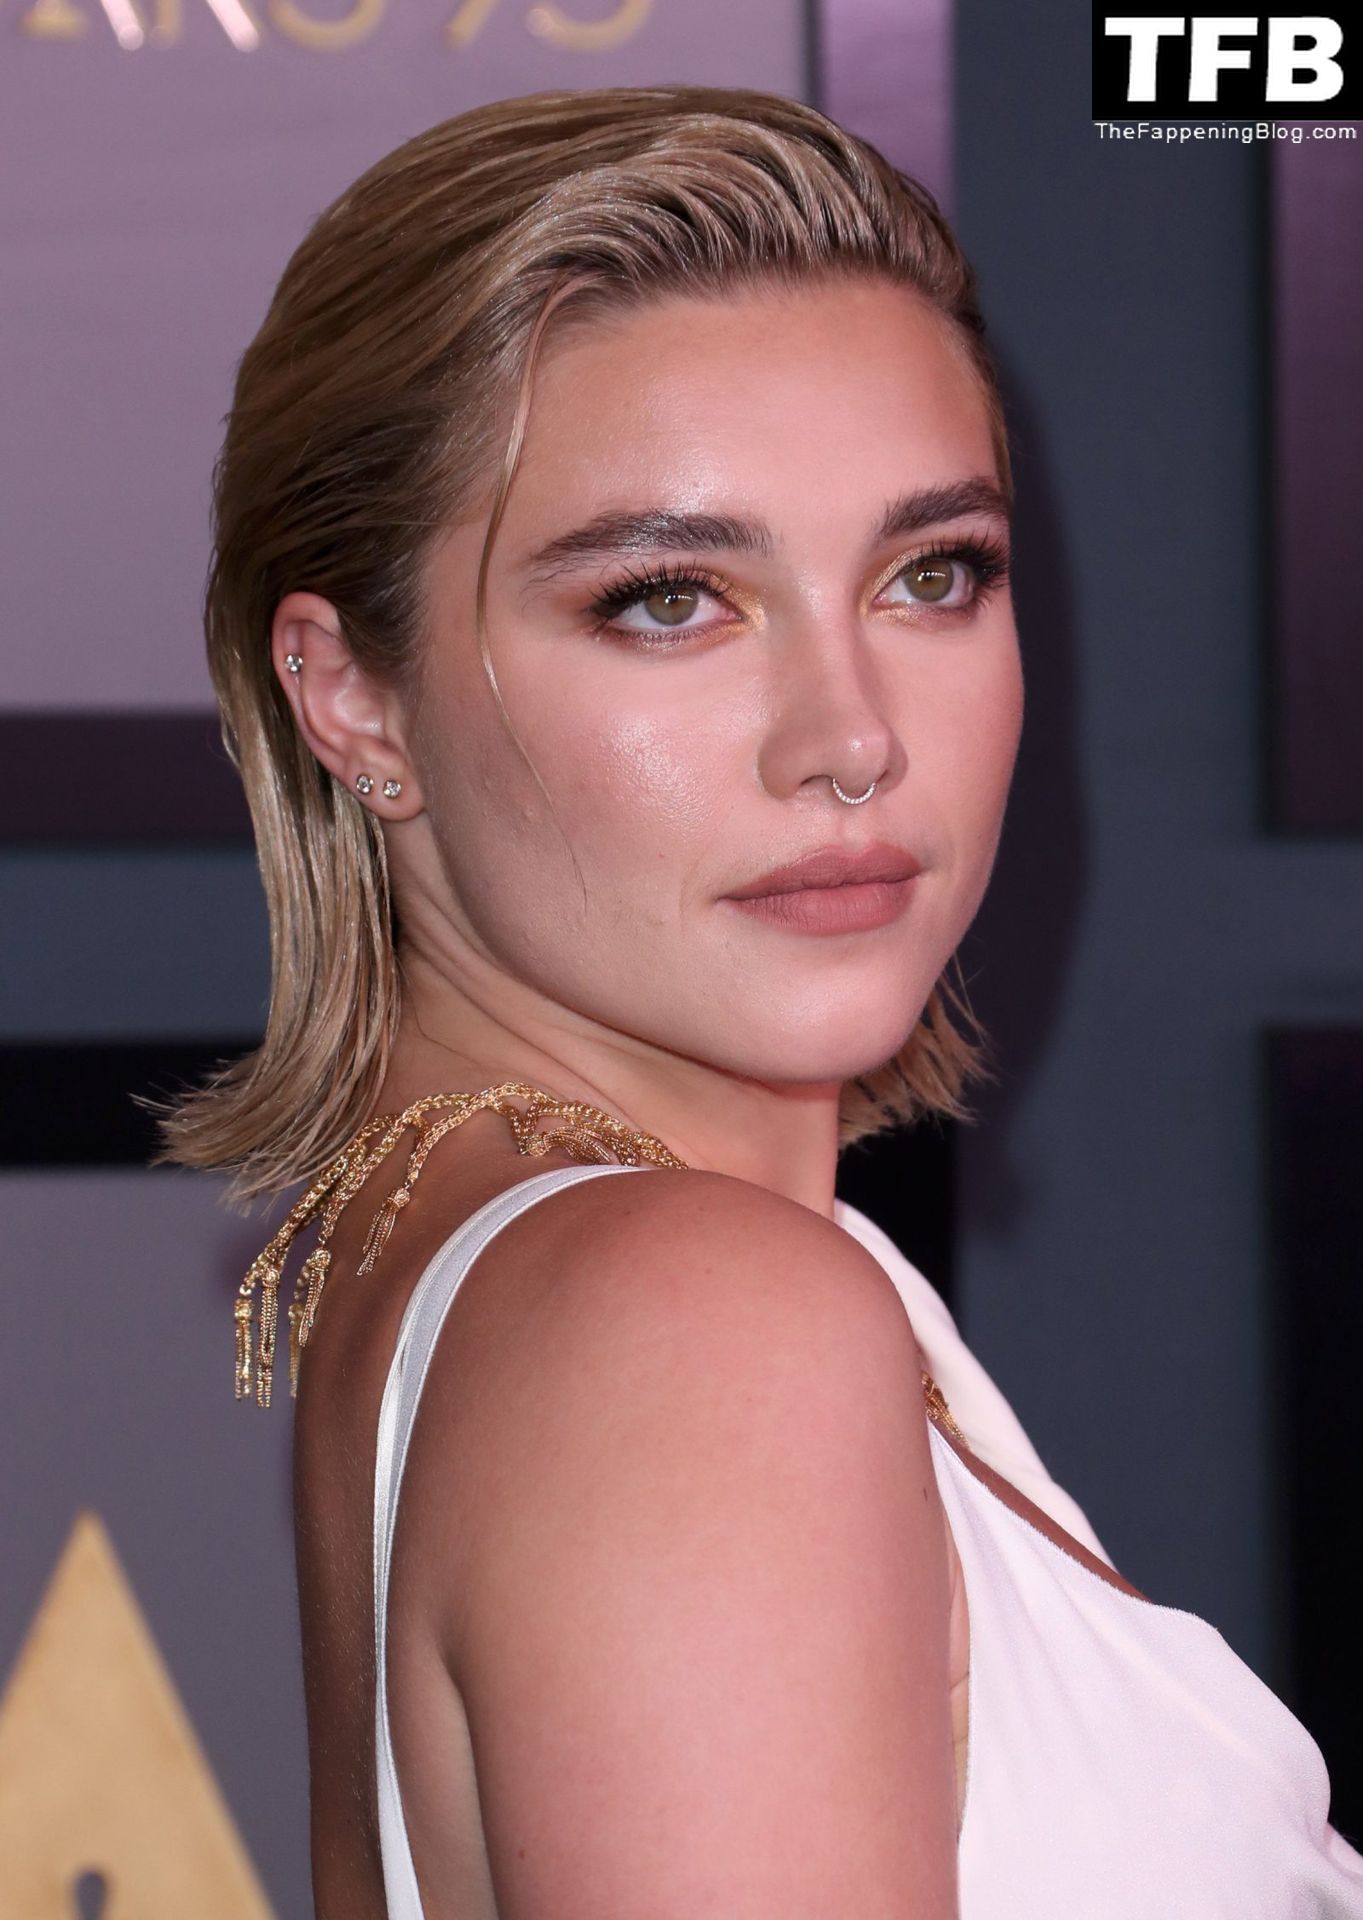 Florence-Pugh-Sexy-The-Fappening-Blog-4-1.jpg